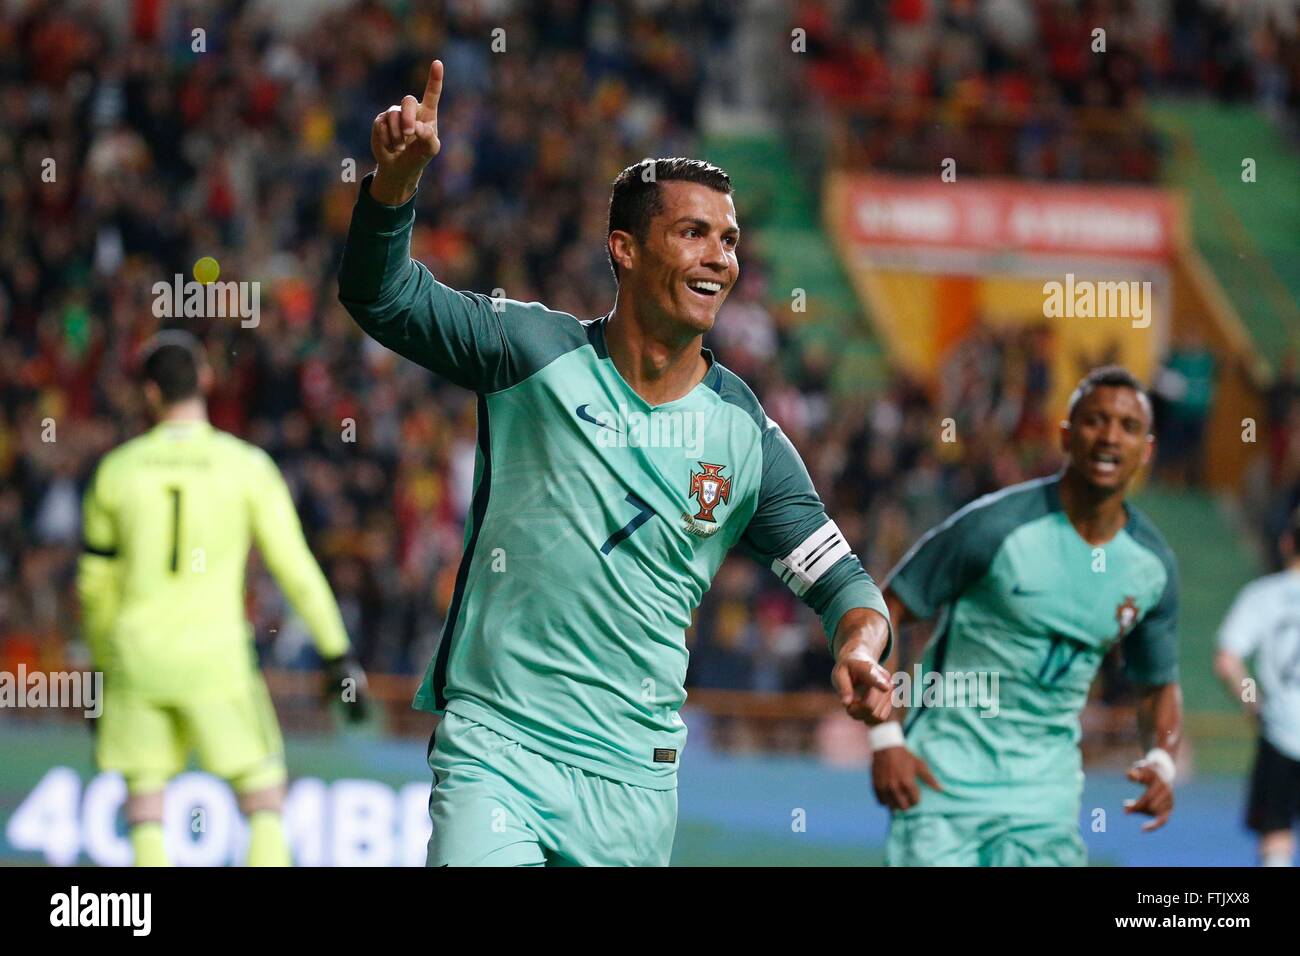 Leiria, Portugal. 29th Mar, 2016. Portugal's Cristiano Ronaldo celebrates  his goal for Portugal during the FIFA international friendly match between  Portugal and Belgium as part of the preparation of the Belgian national